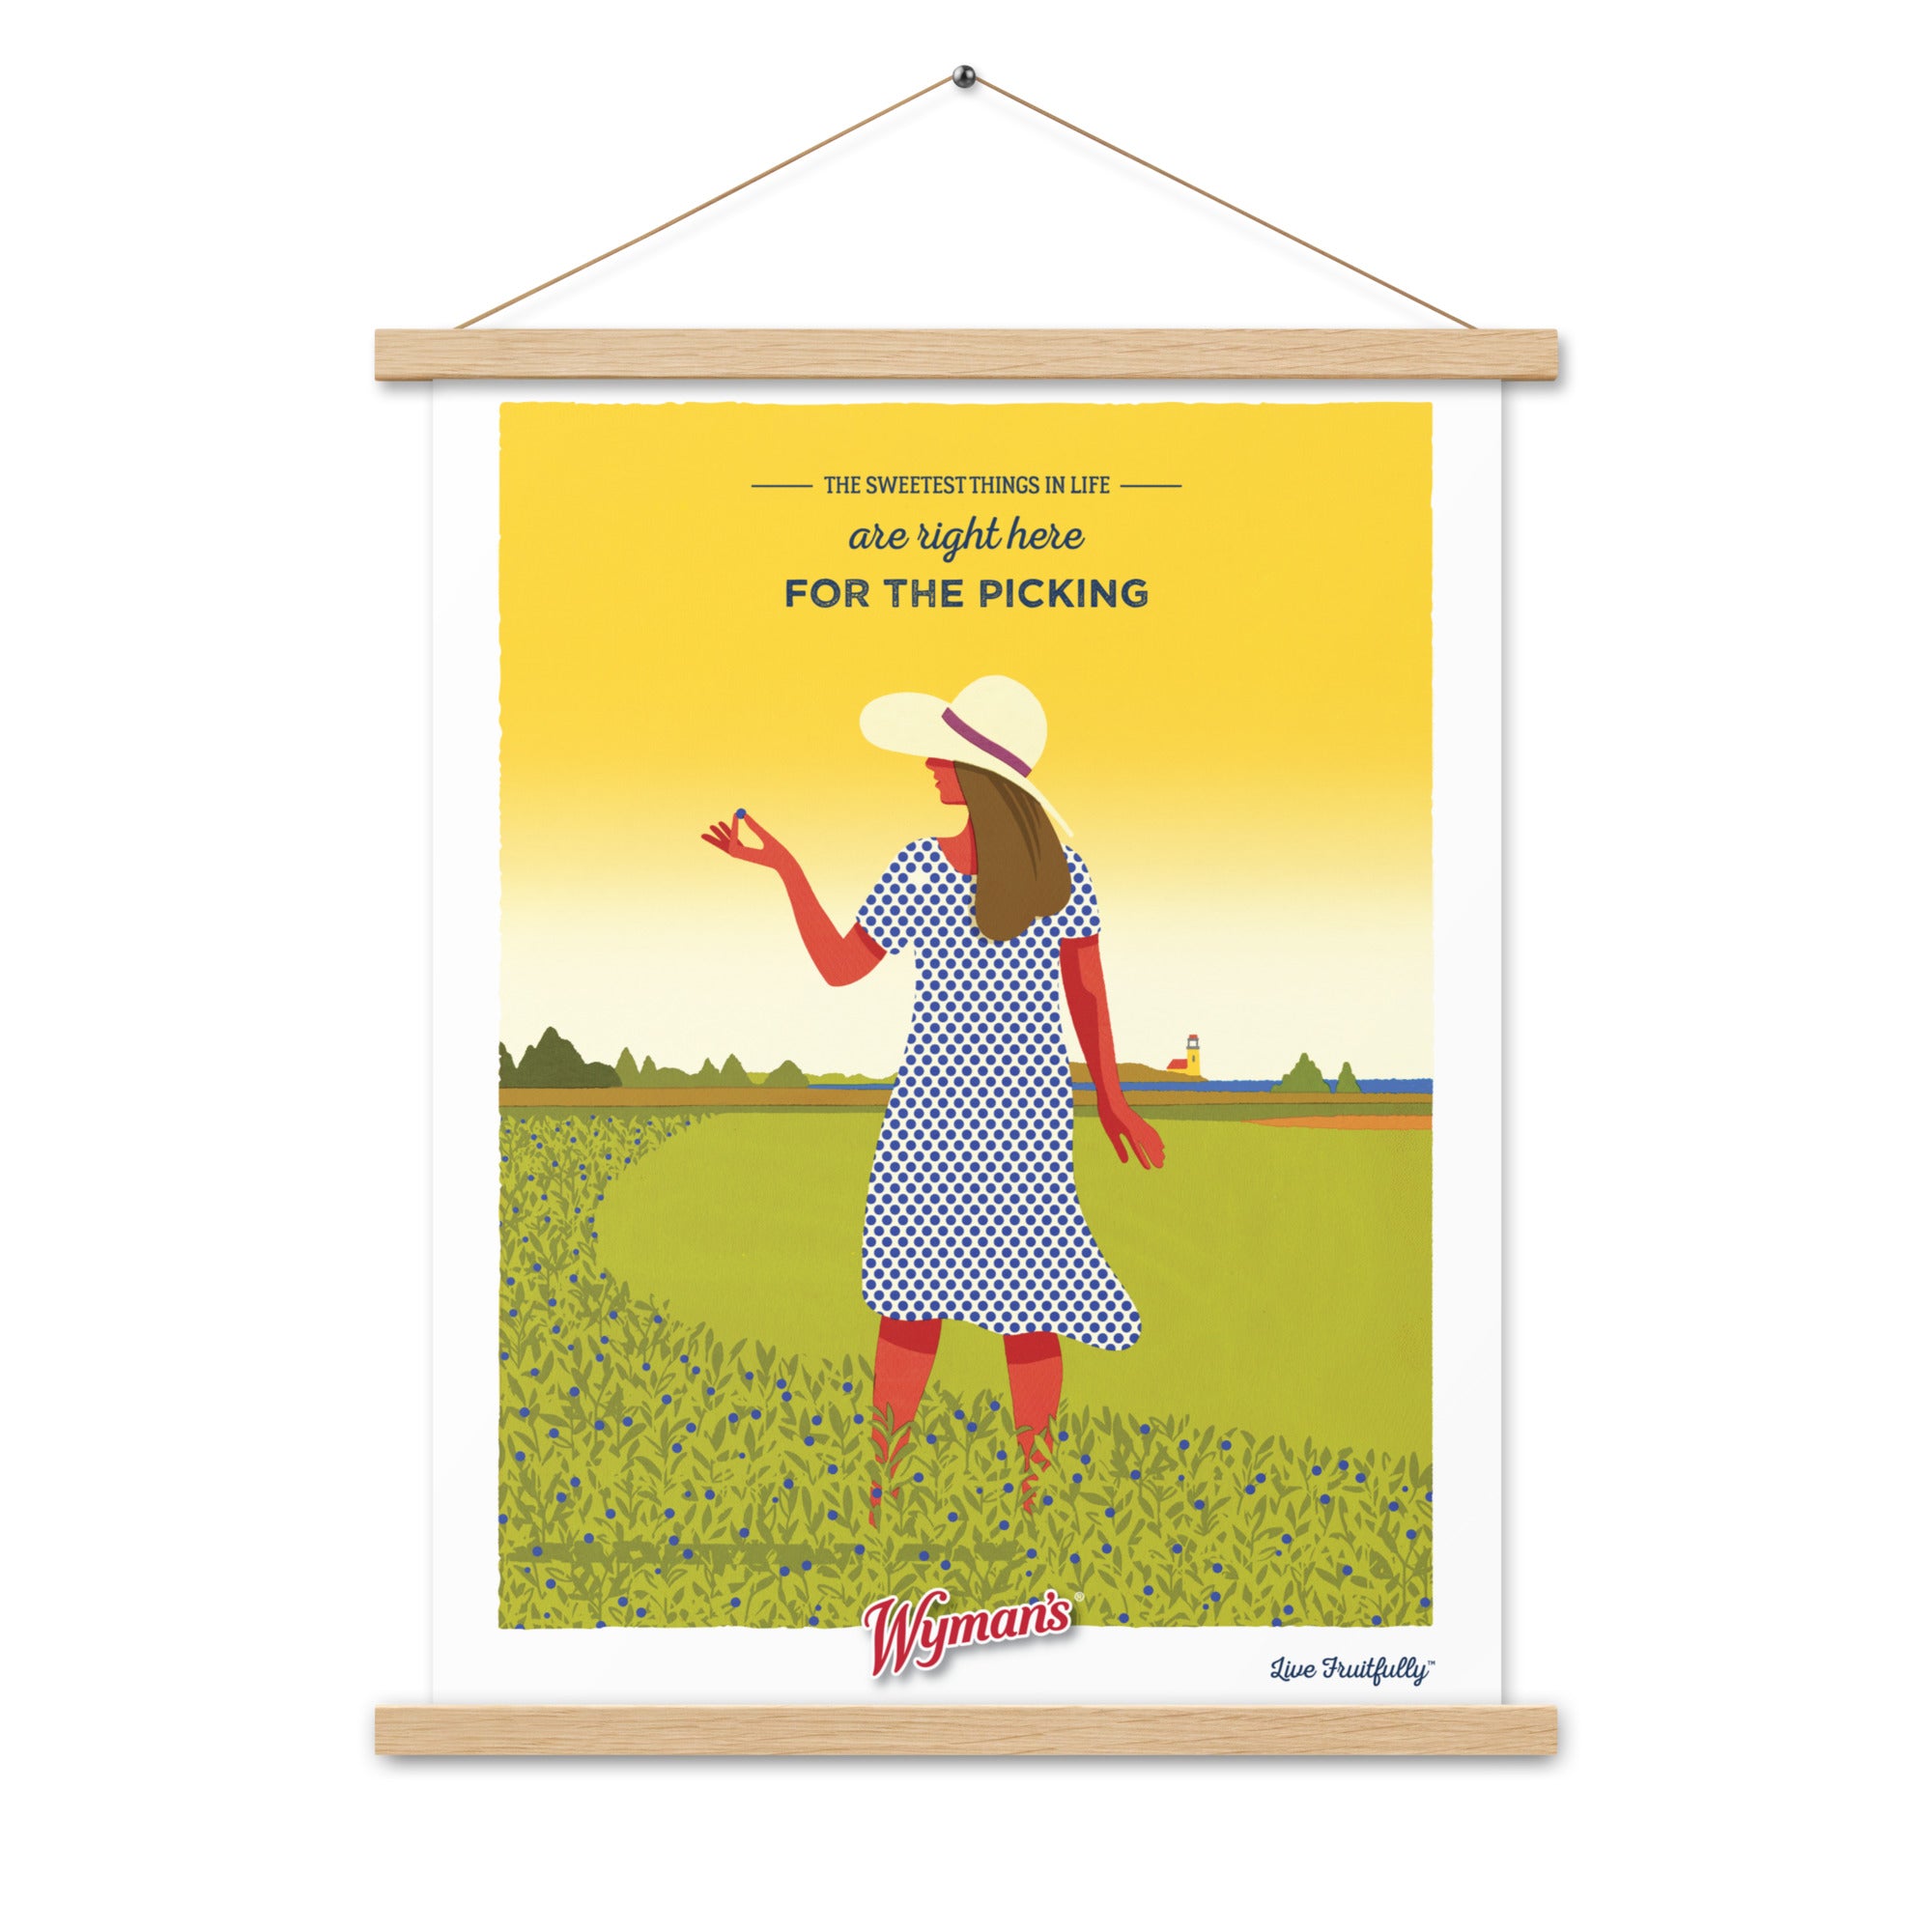 A Shop Wyman's "The Sweetest Things in Life are Right Here for the Picking" poster with a custom printing finish featuring a woman in a hat standing in a field.